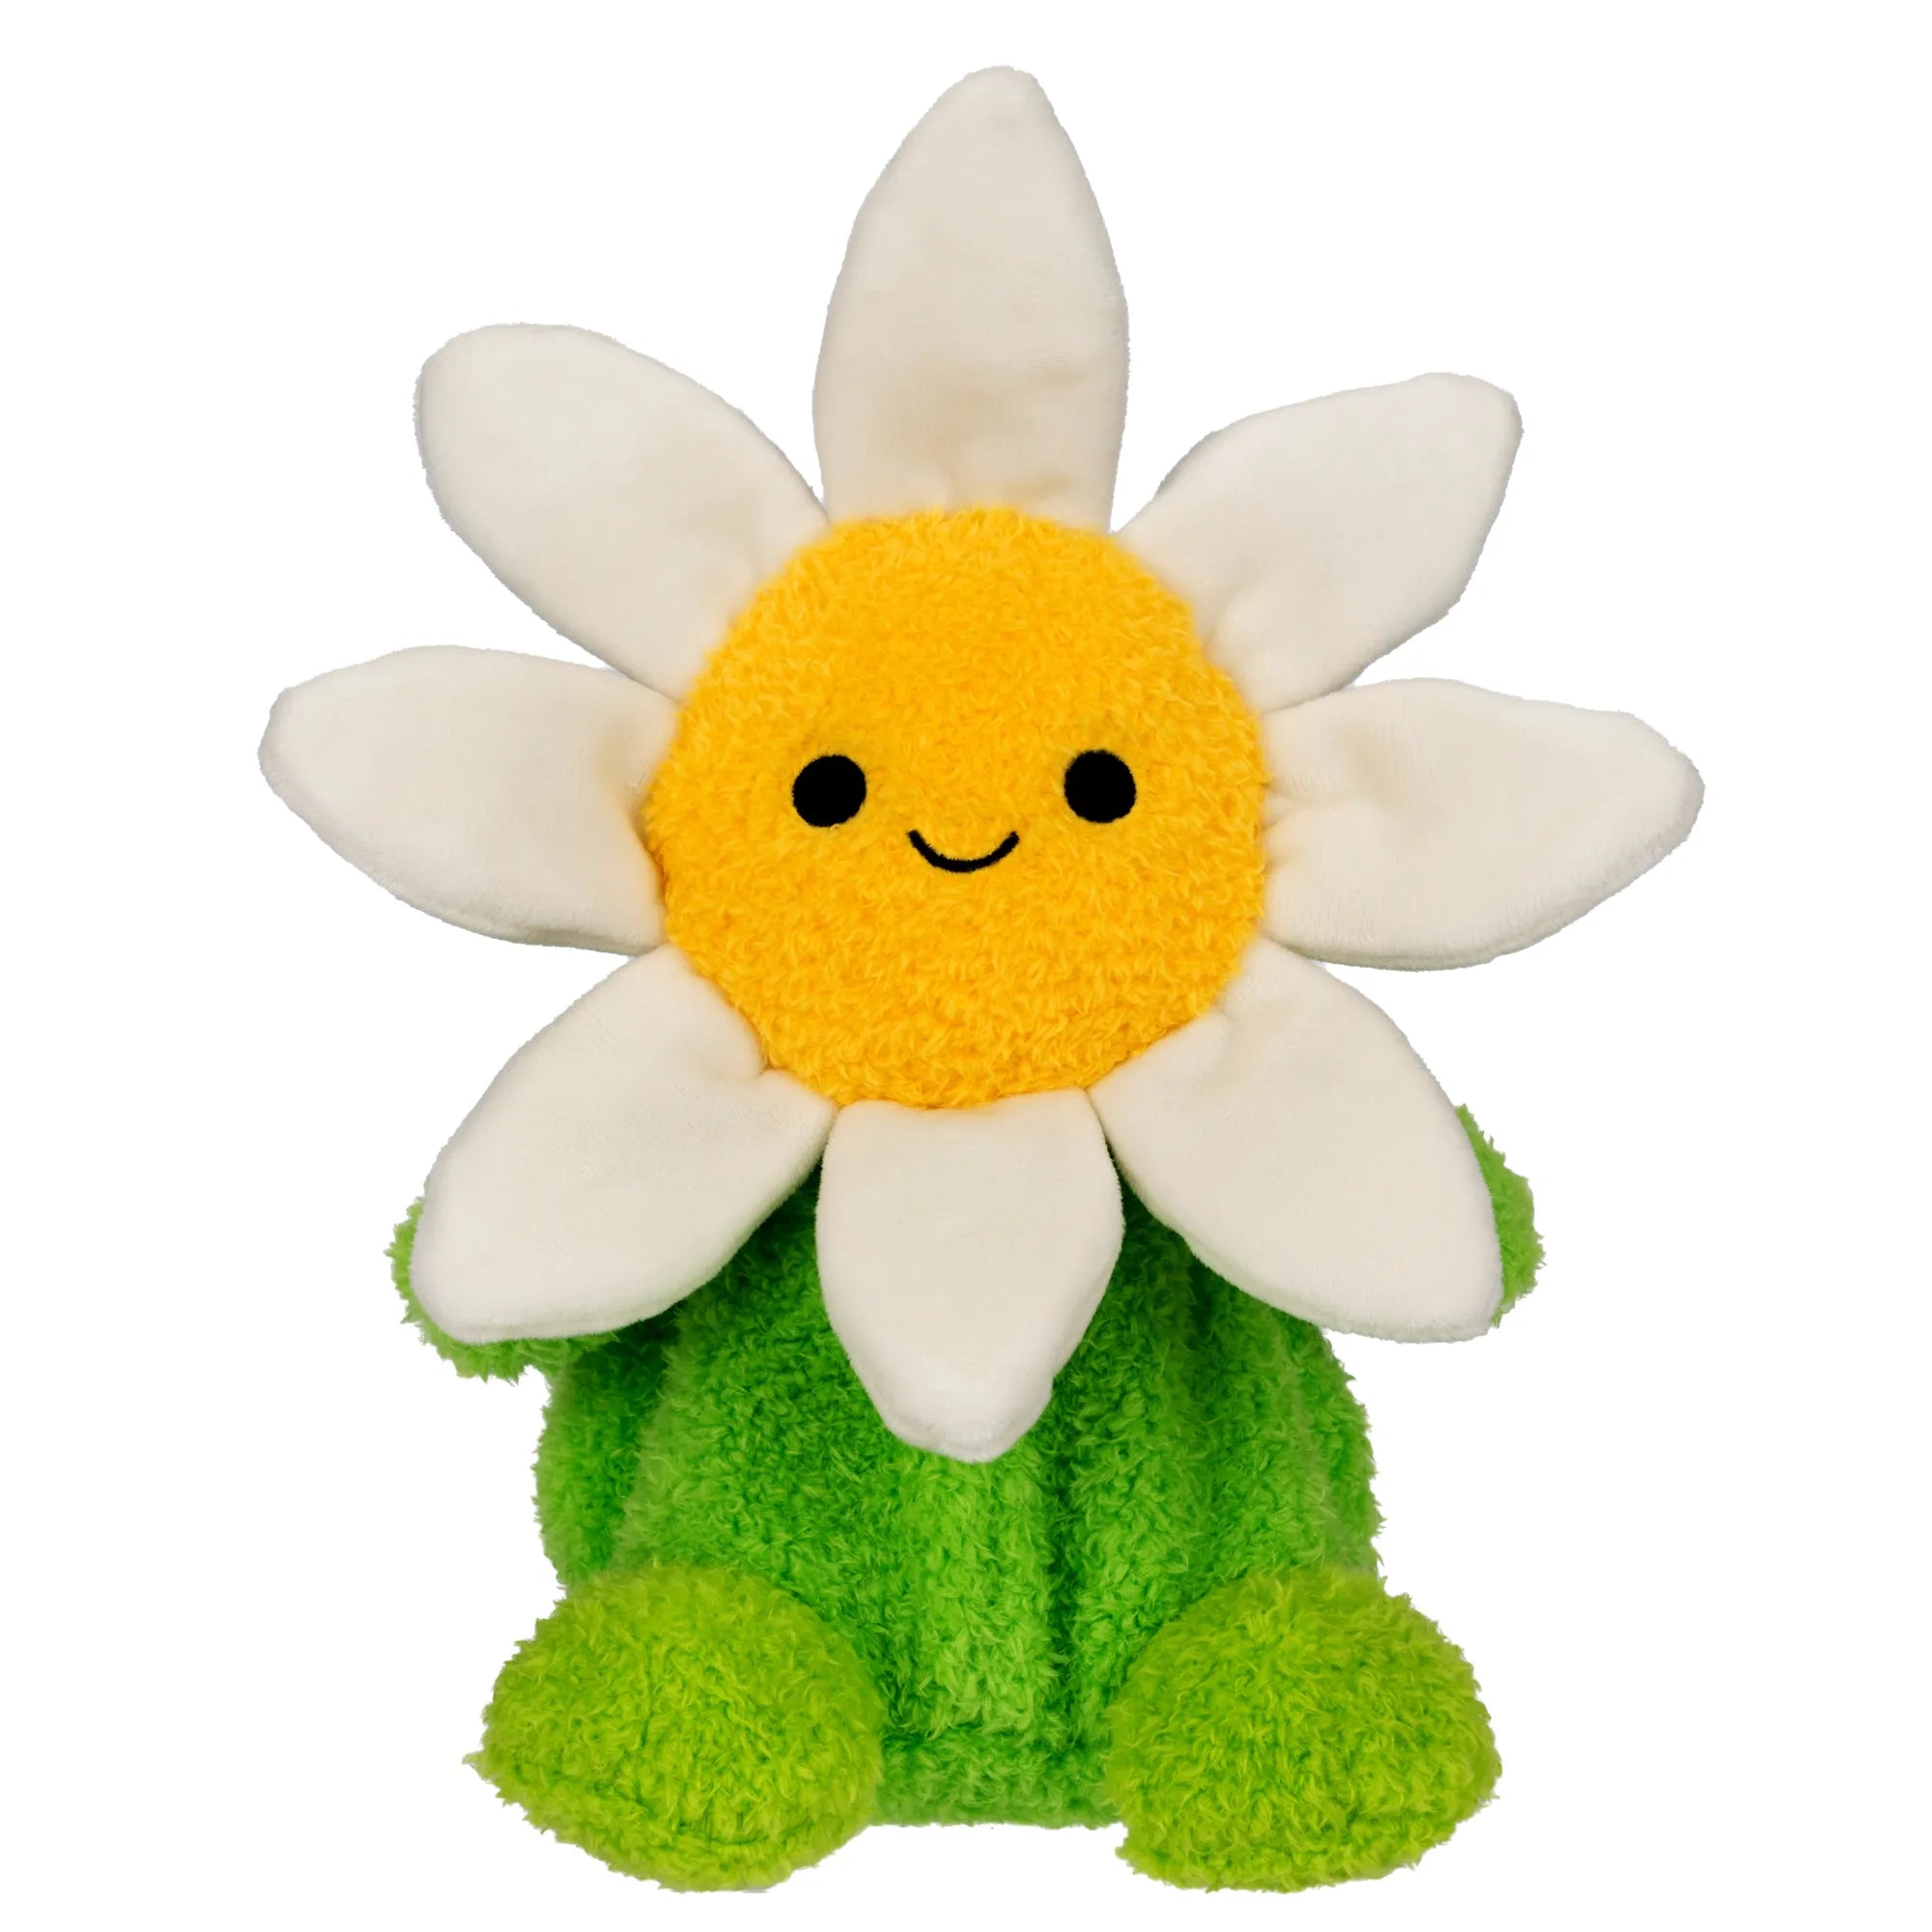 BumBumz 7.5” Garden Series - Collectibles - Daisy Flower 'Danielle' - Ages 3-Adult - Brown's Hobby & Game